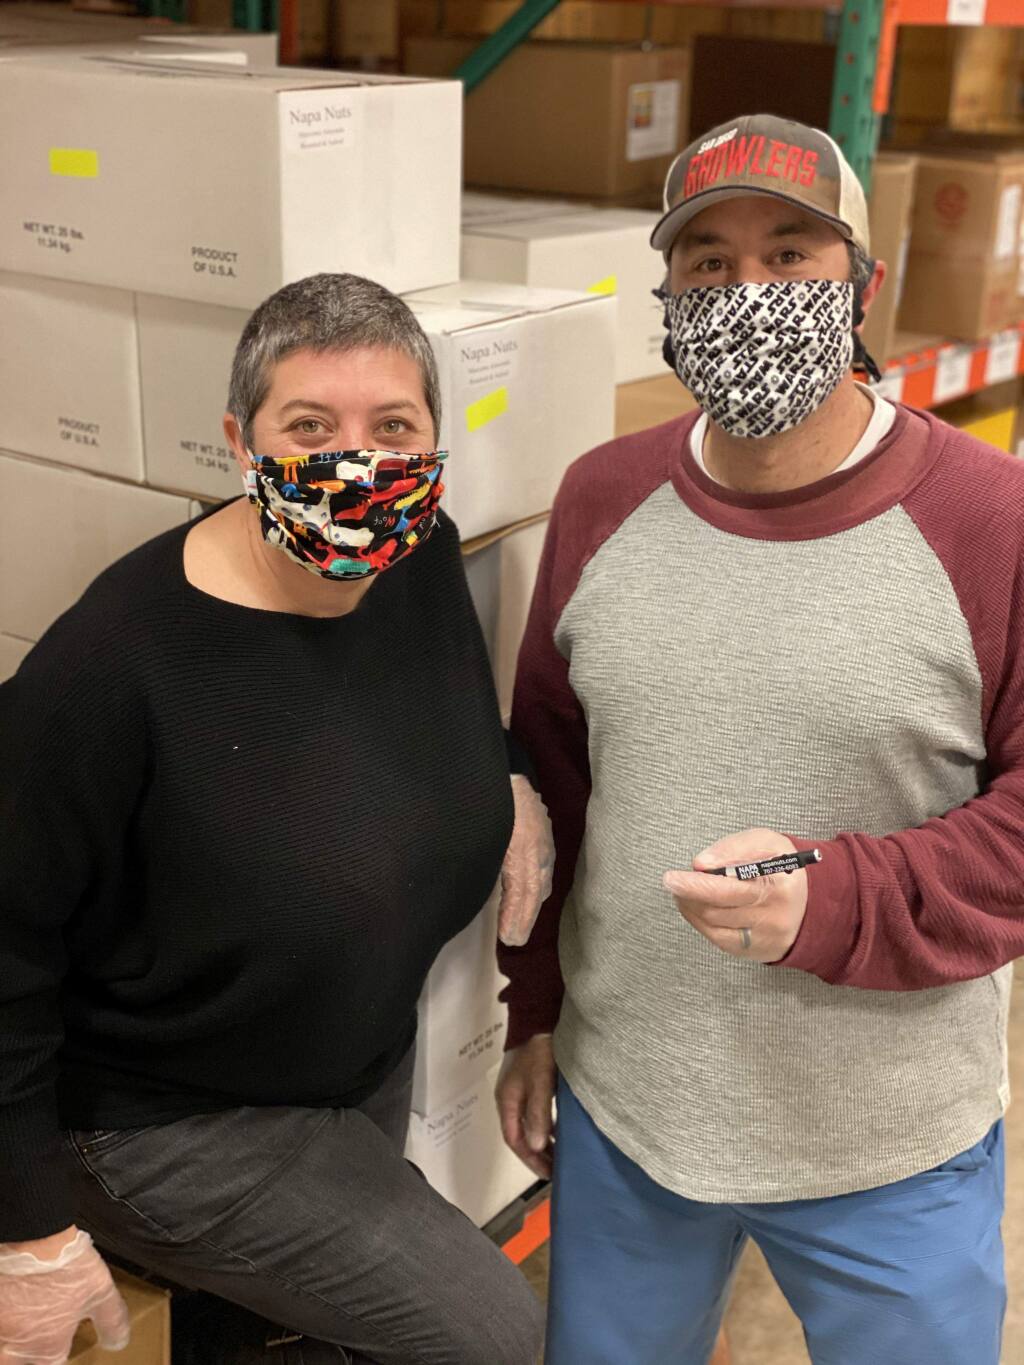 Sister and brother team Bonnie Miluso and Schecky Miluso run Napa Nuts, a family business. (courtesy photo)